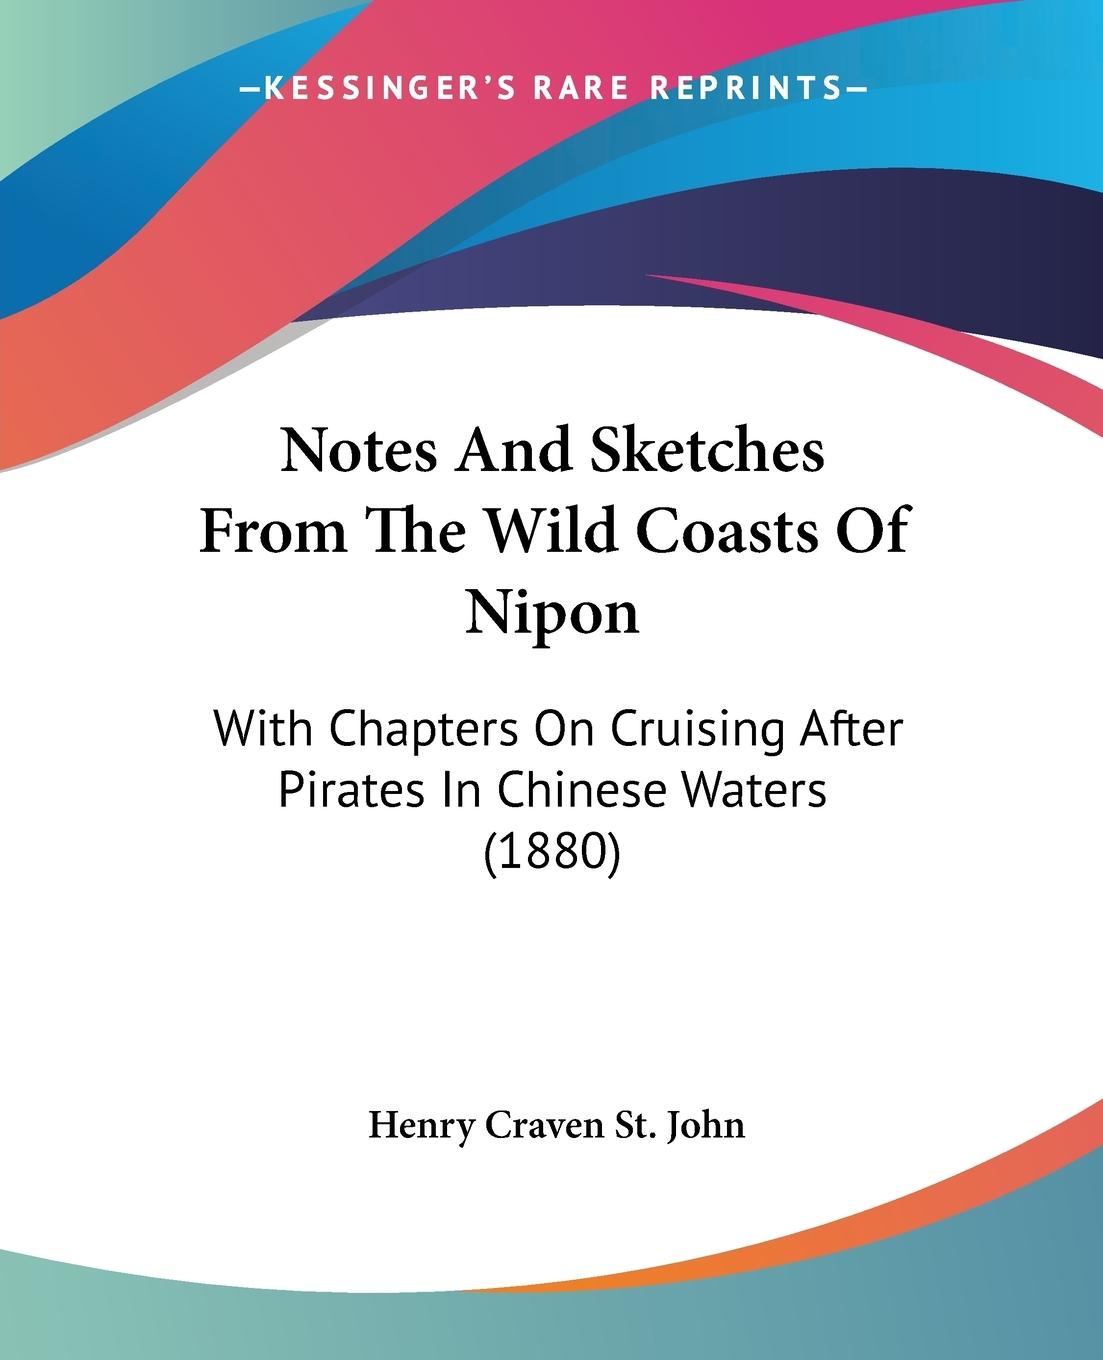 Notes And Sketches From The Wild Coasts Of Nipon - St. John, Henry Craven